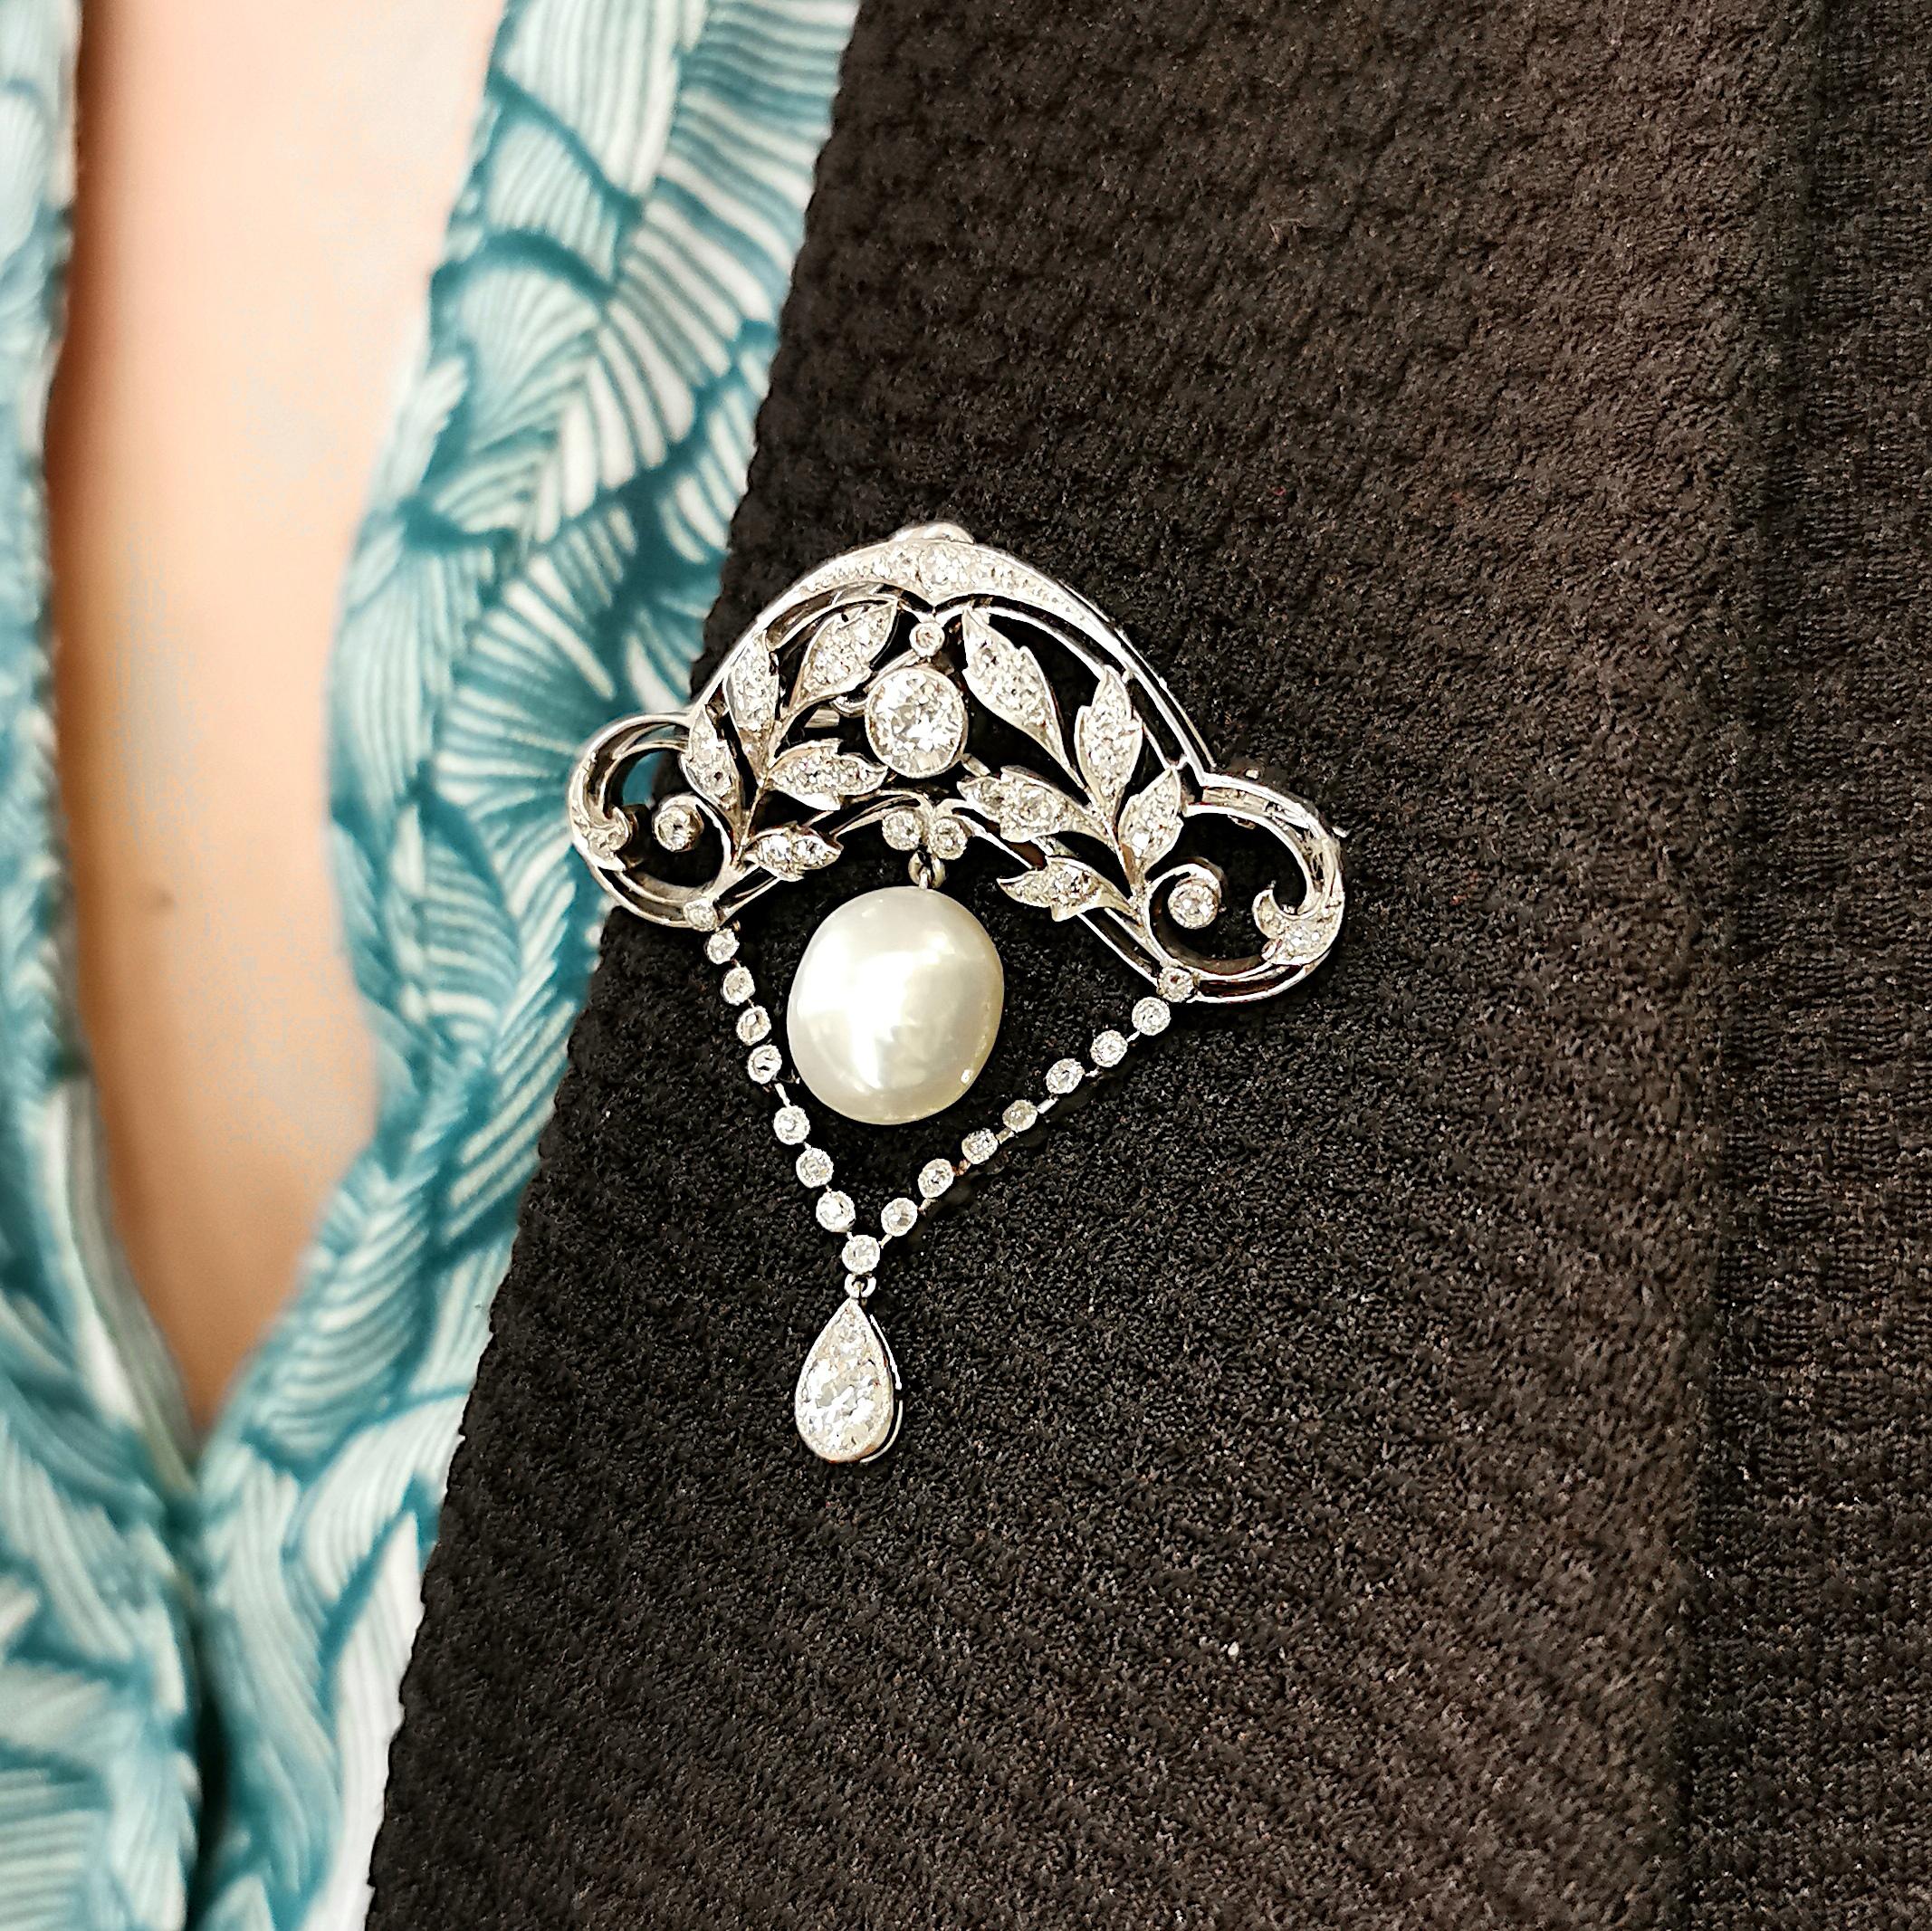 A fine Edwardian, natural pearl and diamond brooch-pendant, with an old-cut diamond, flanked by leaf motifs, in an open work, curved, Art Nouveau influenced frame, with a natural pearl pendant suspended from the centre, with a row of old-cut